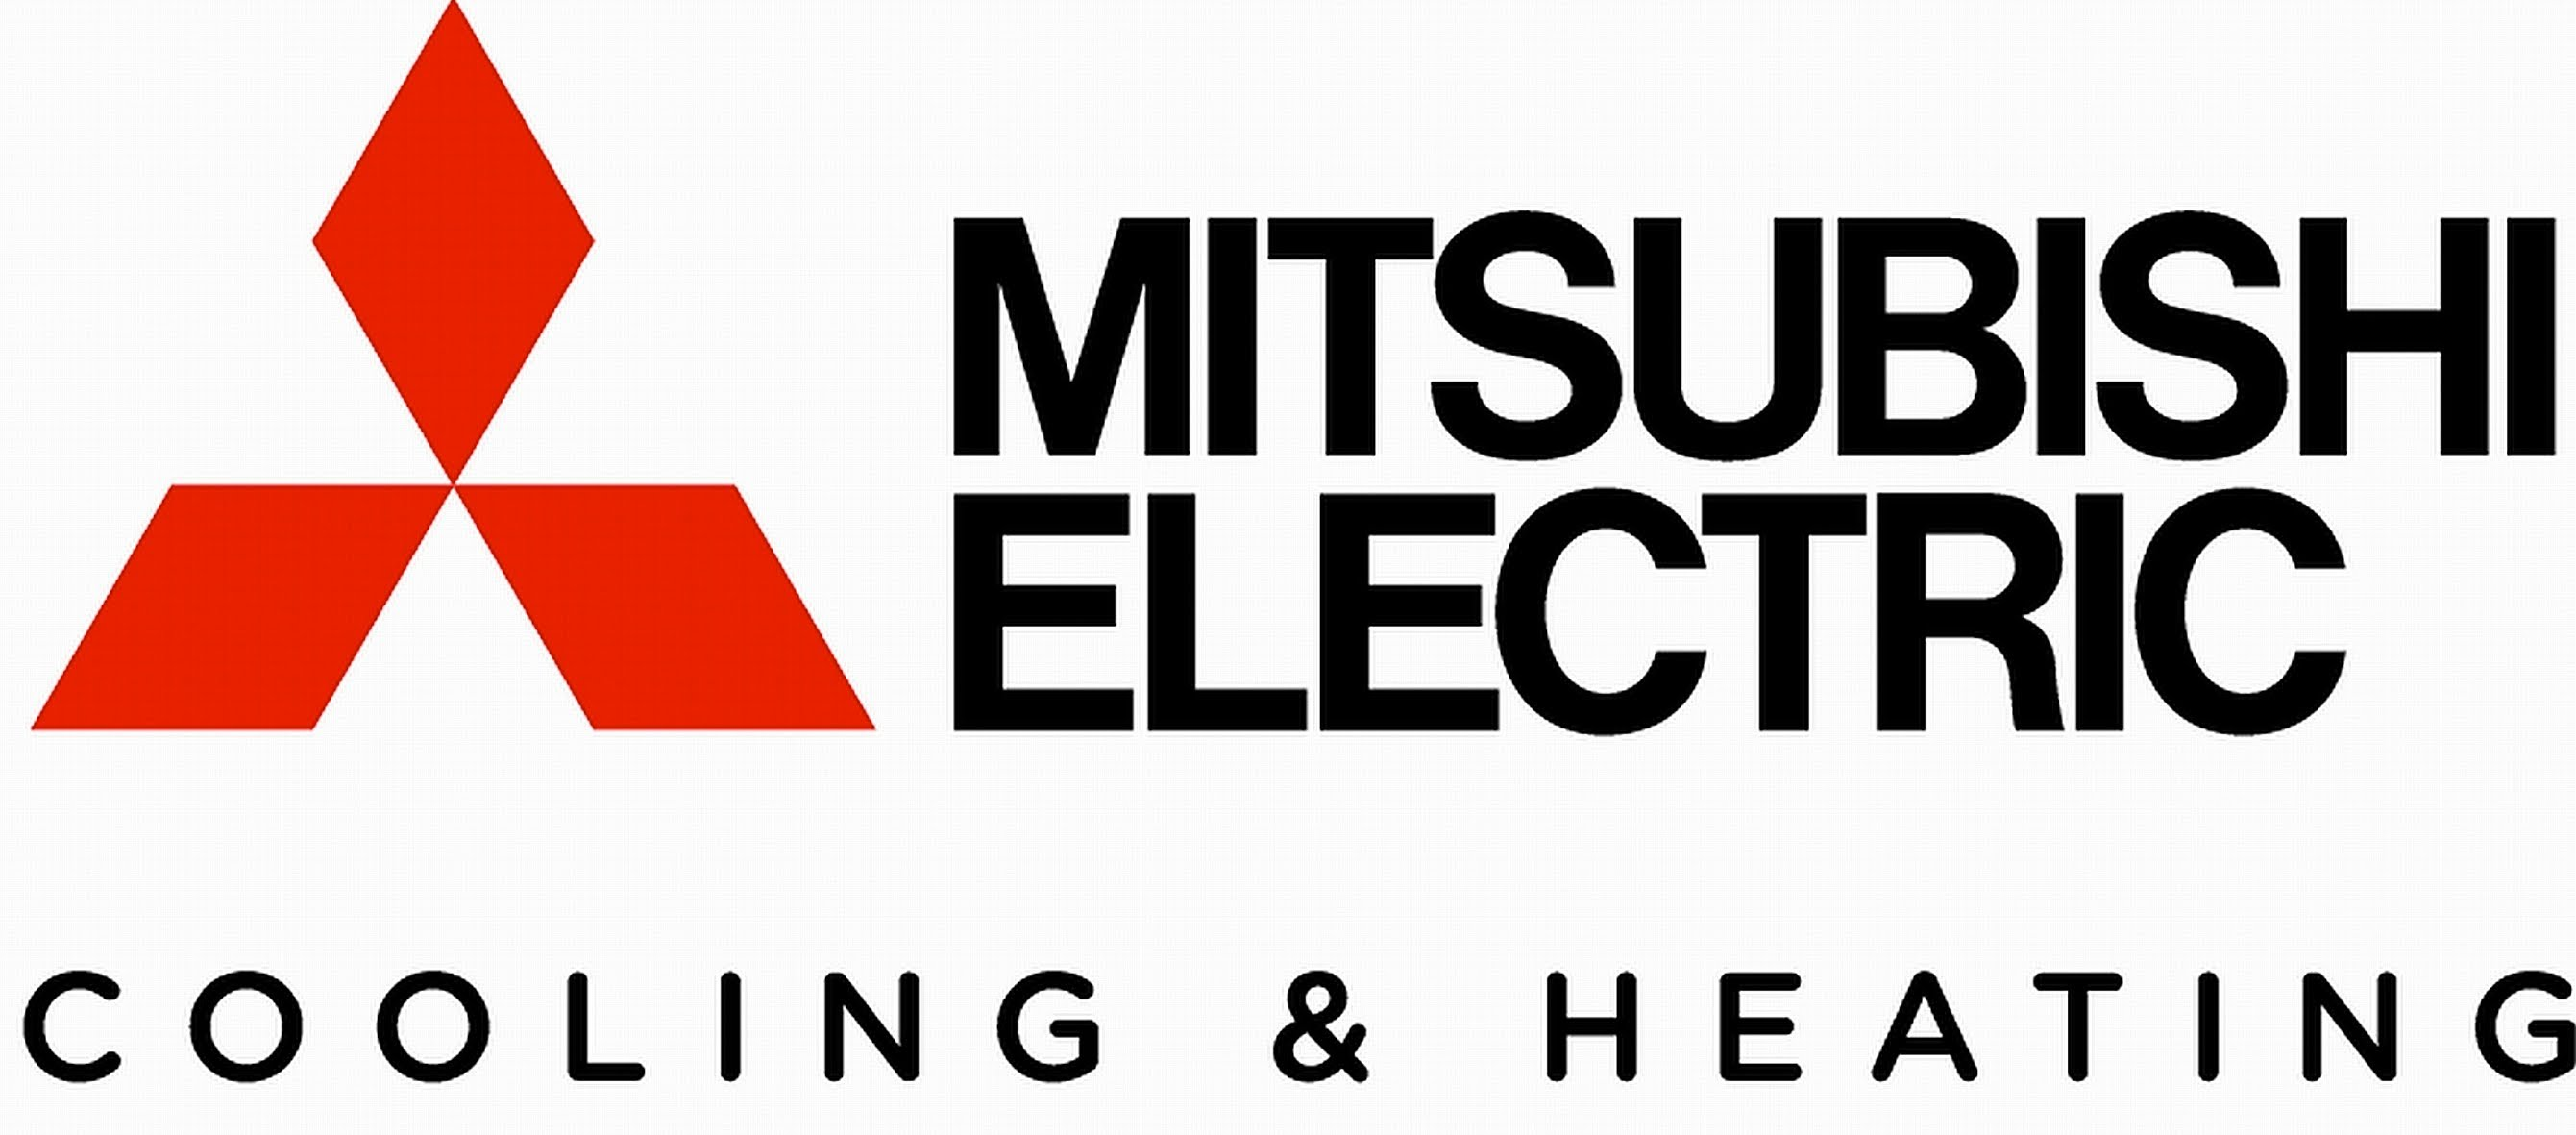 Mitsubishi Electric heating and cooling